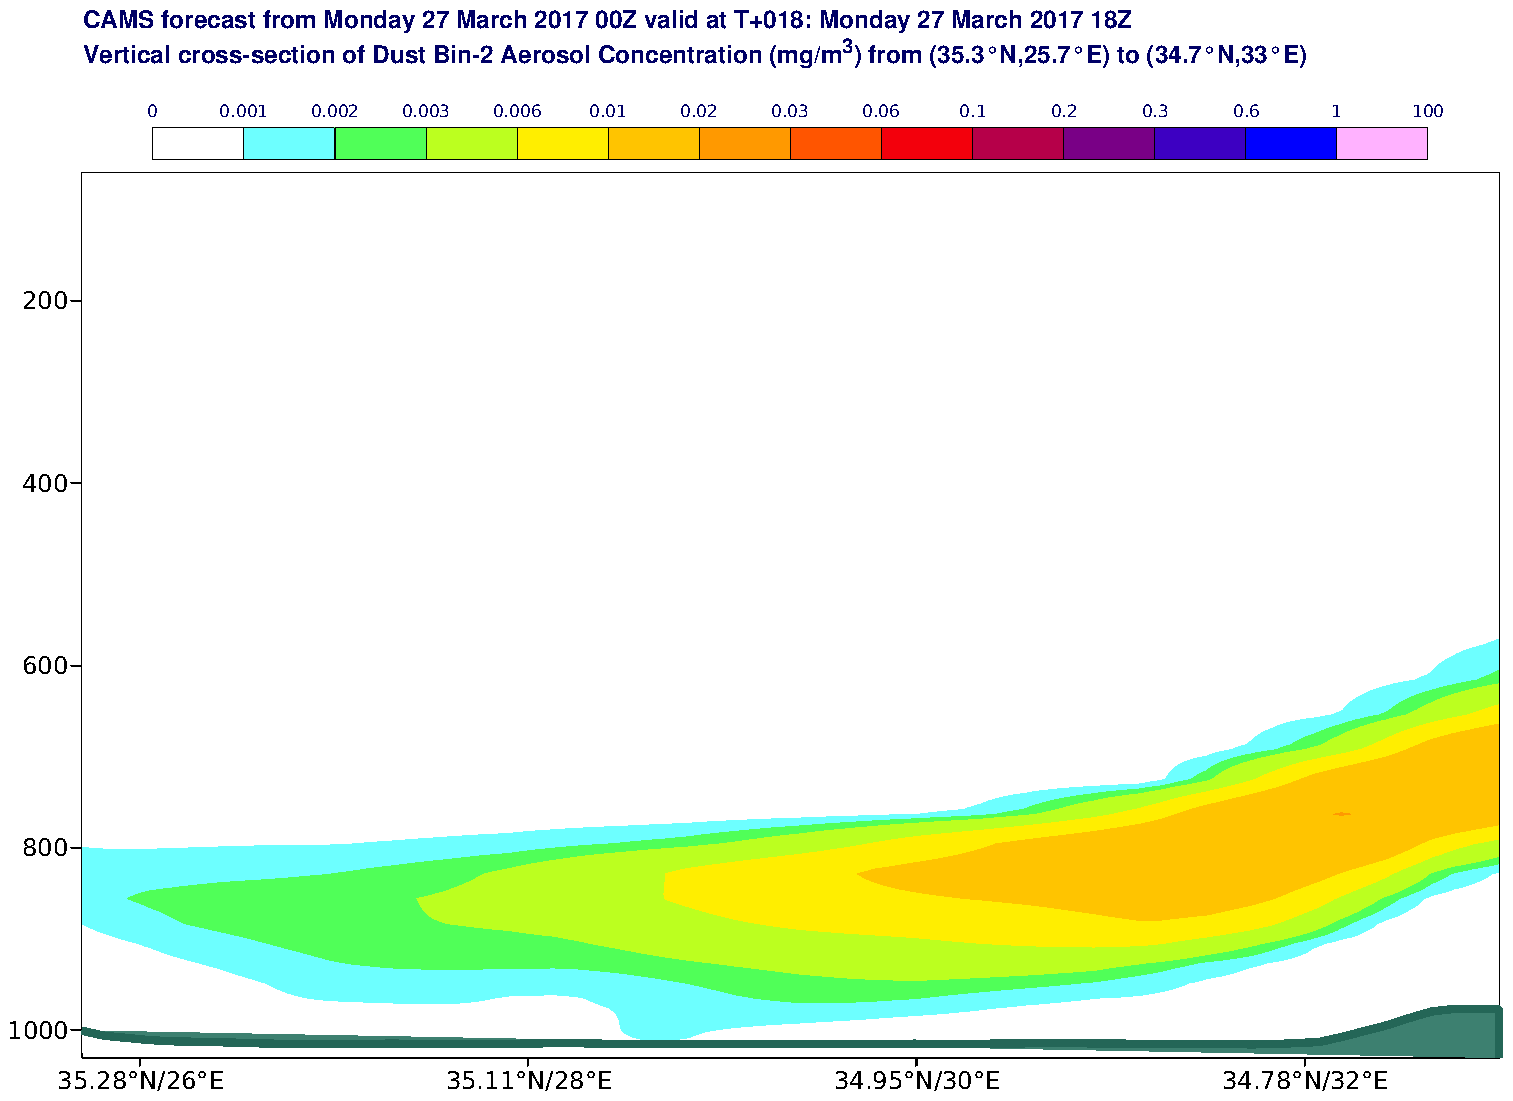 Vertical cross-section of Dust Bin-2 Aerosol Concentration (mg/m3) valid at T18 - 2017-03-27 18:00